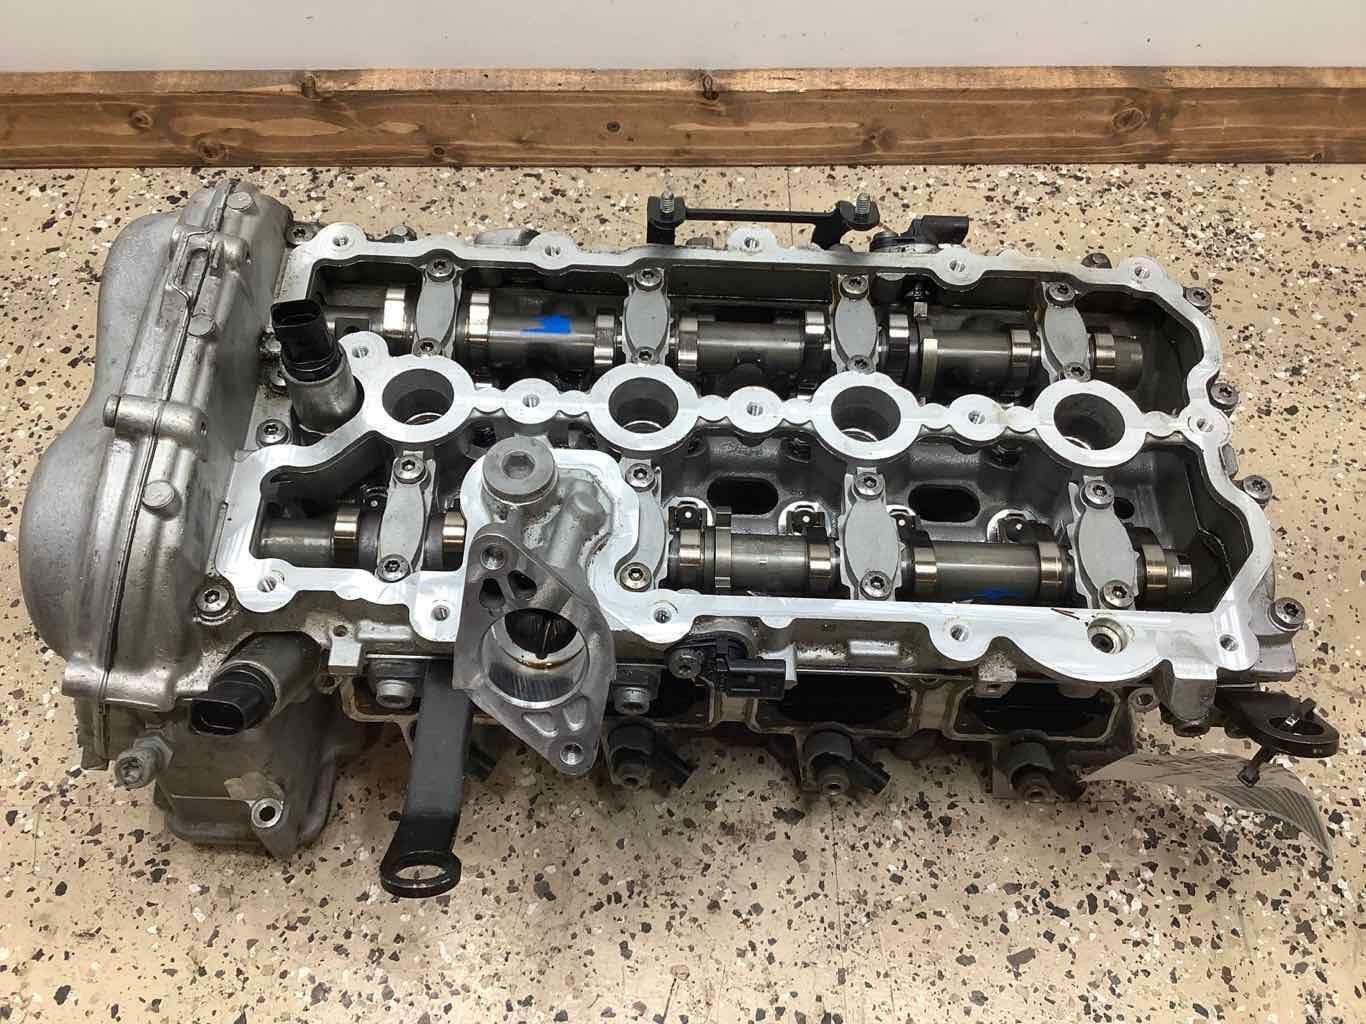 13-15 Audi RS5 4.2L Left Driver Cylinder Head - W/ Cams (Need Timed)